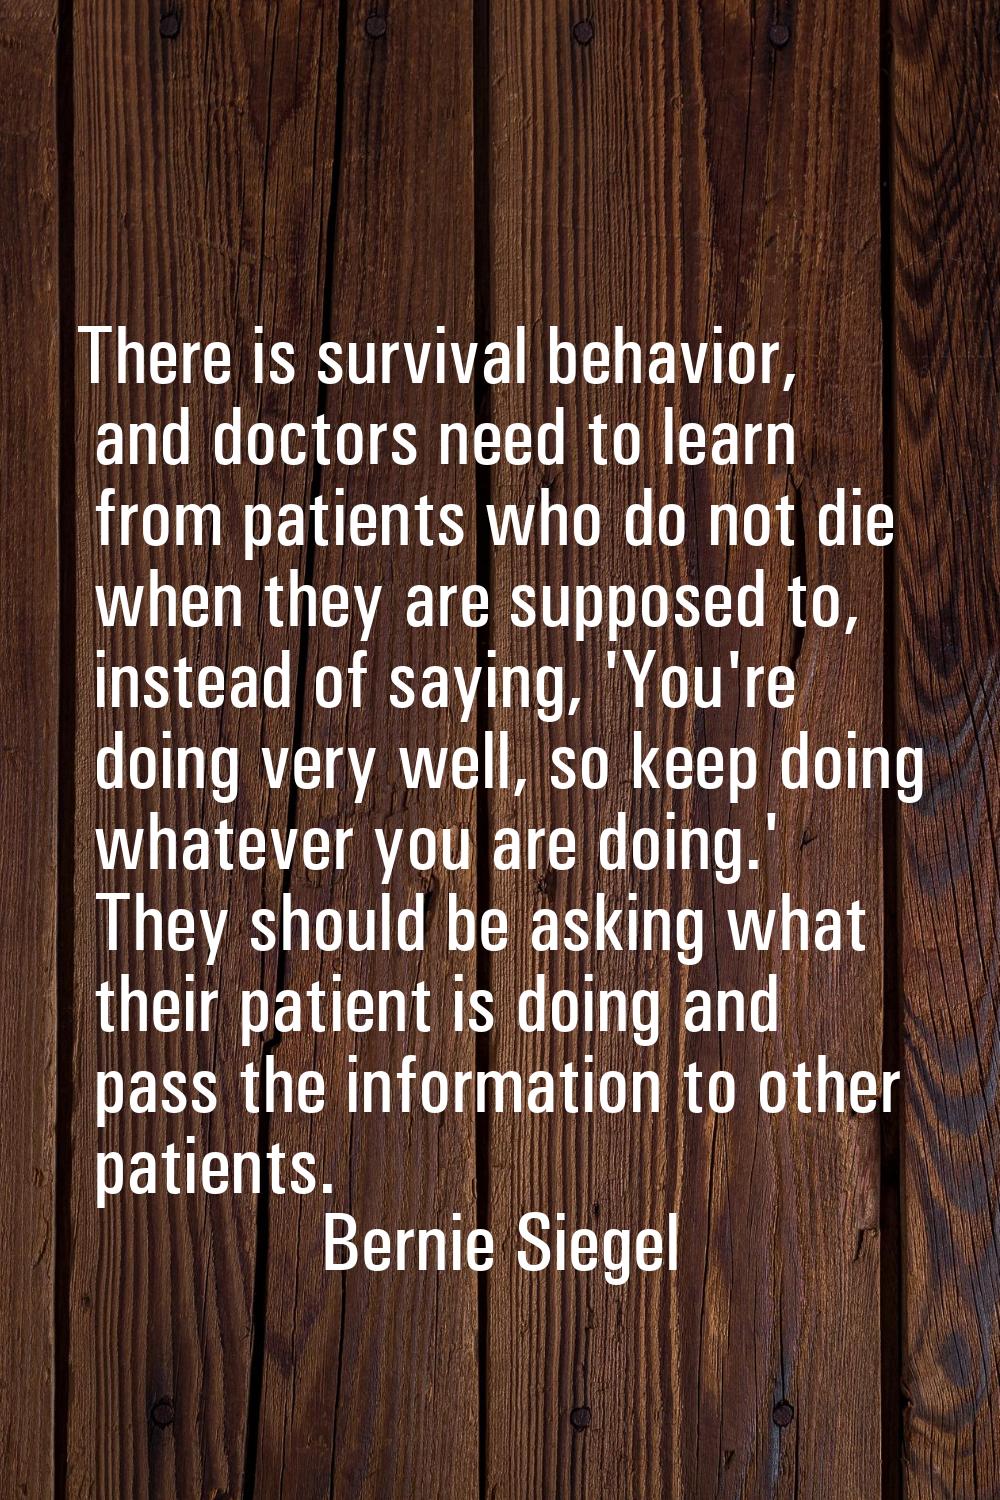 There is survival behavior, and doctors need to learn from patients who do not die when they are su